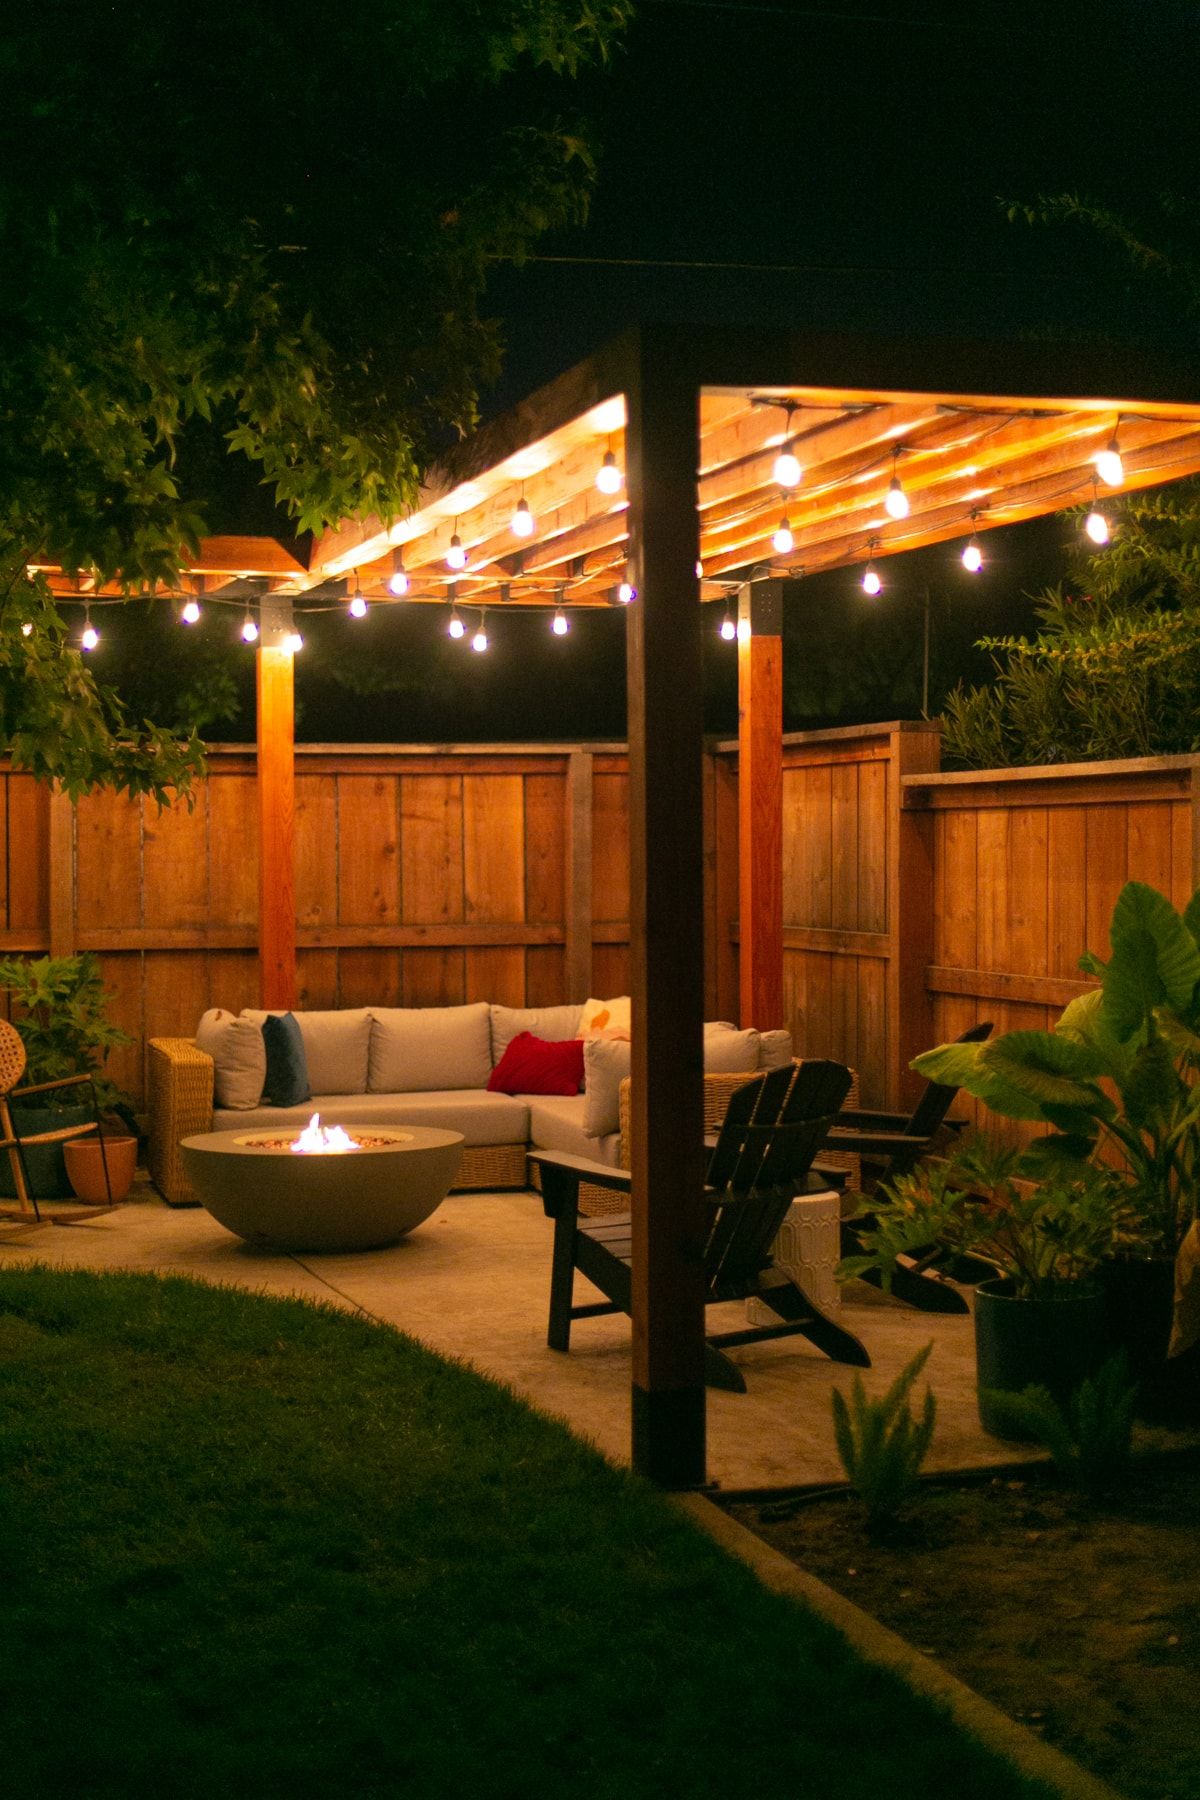 Contemporary Pergola Design: A Stylish
Addition to Your Outdoor Space